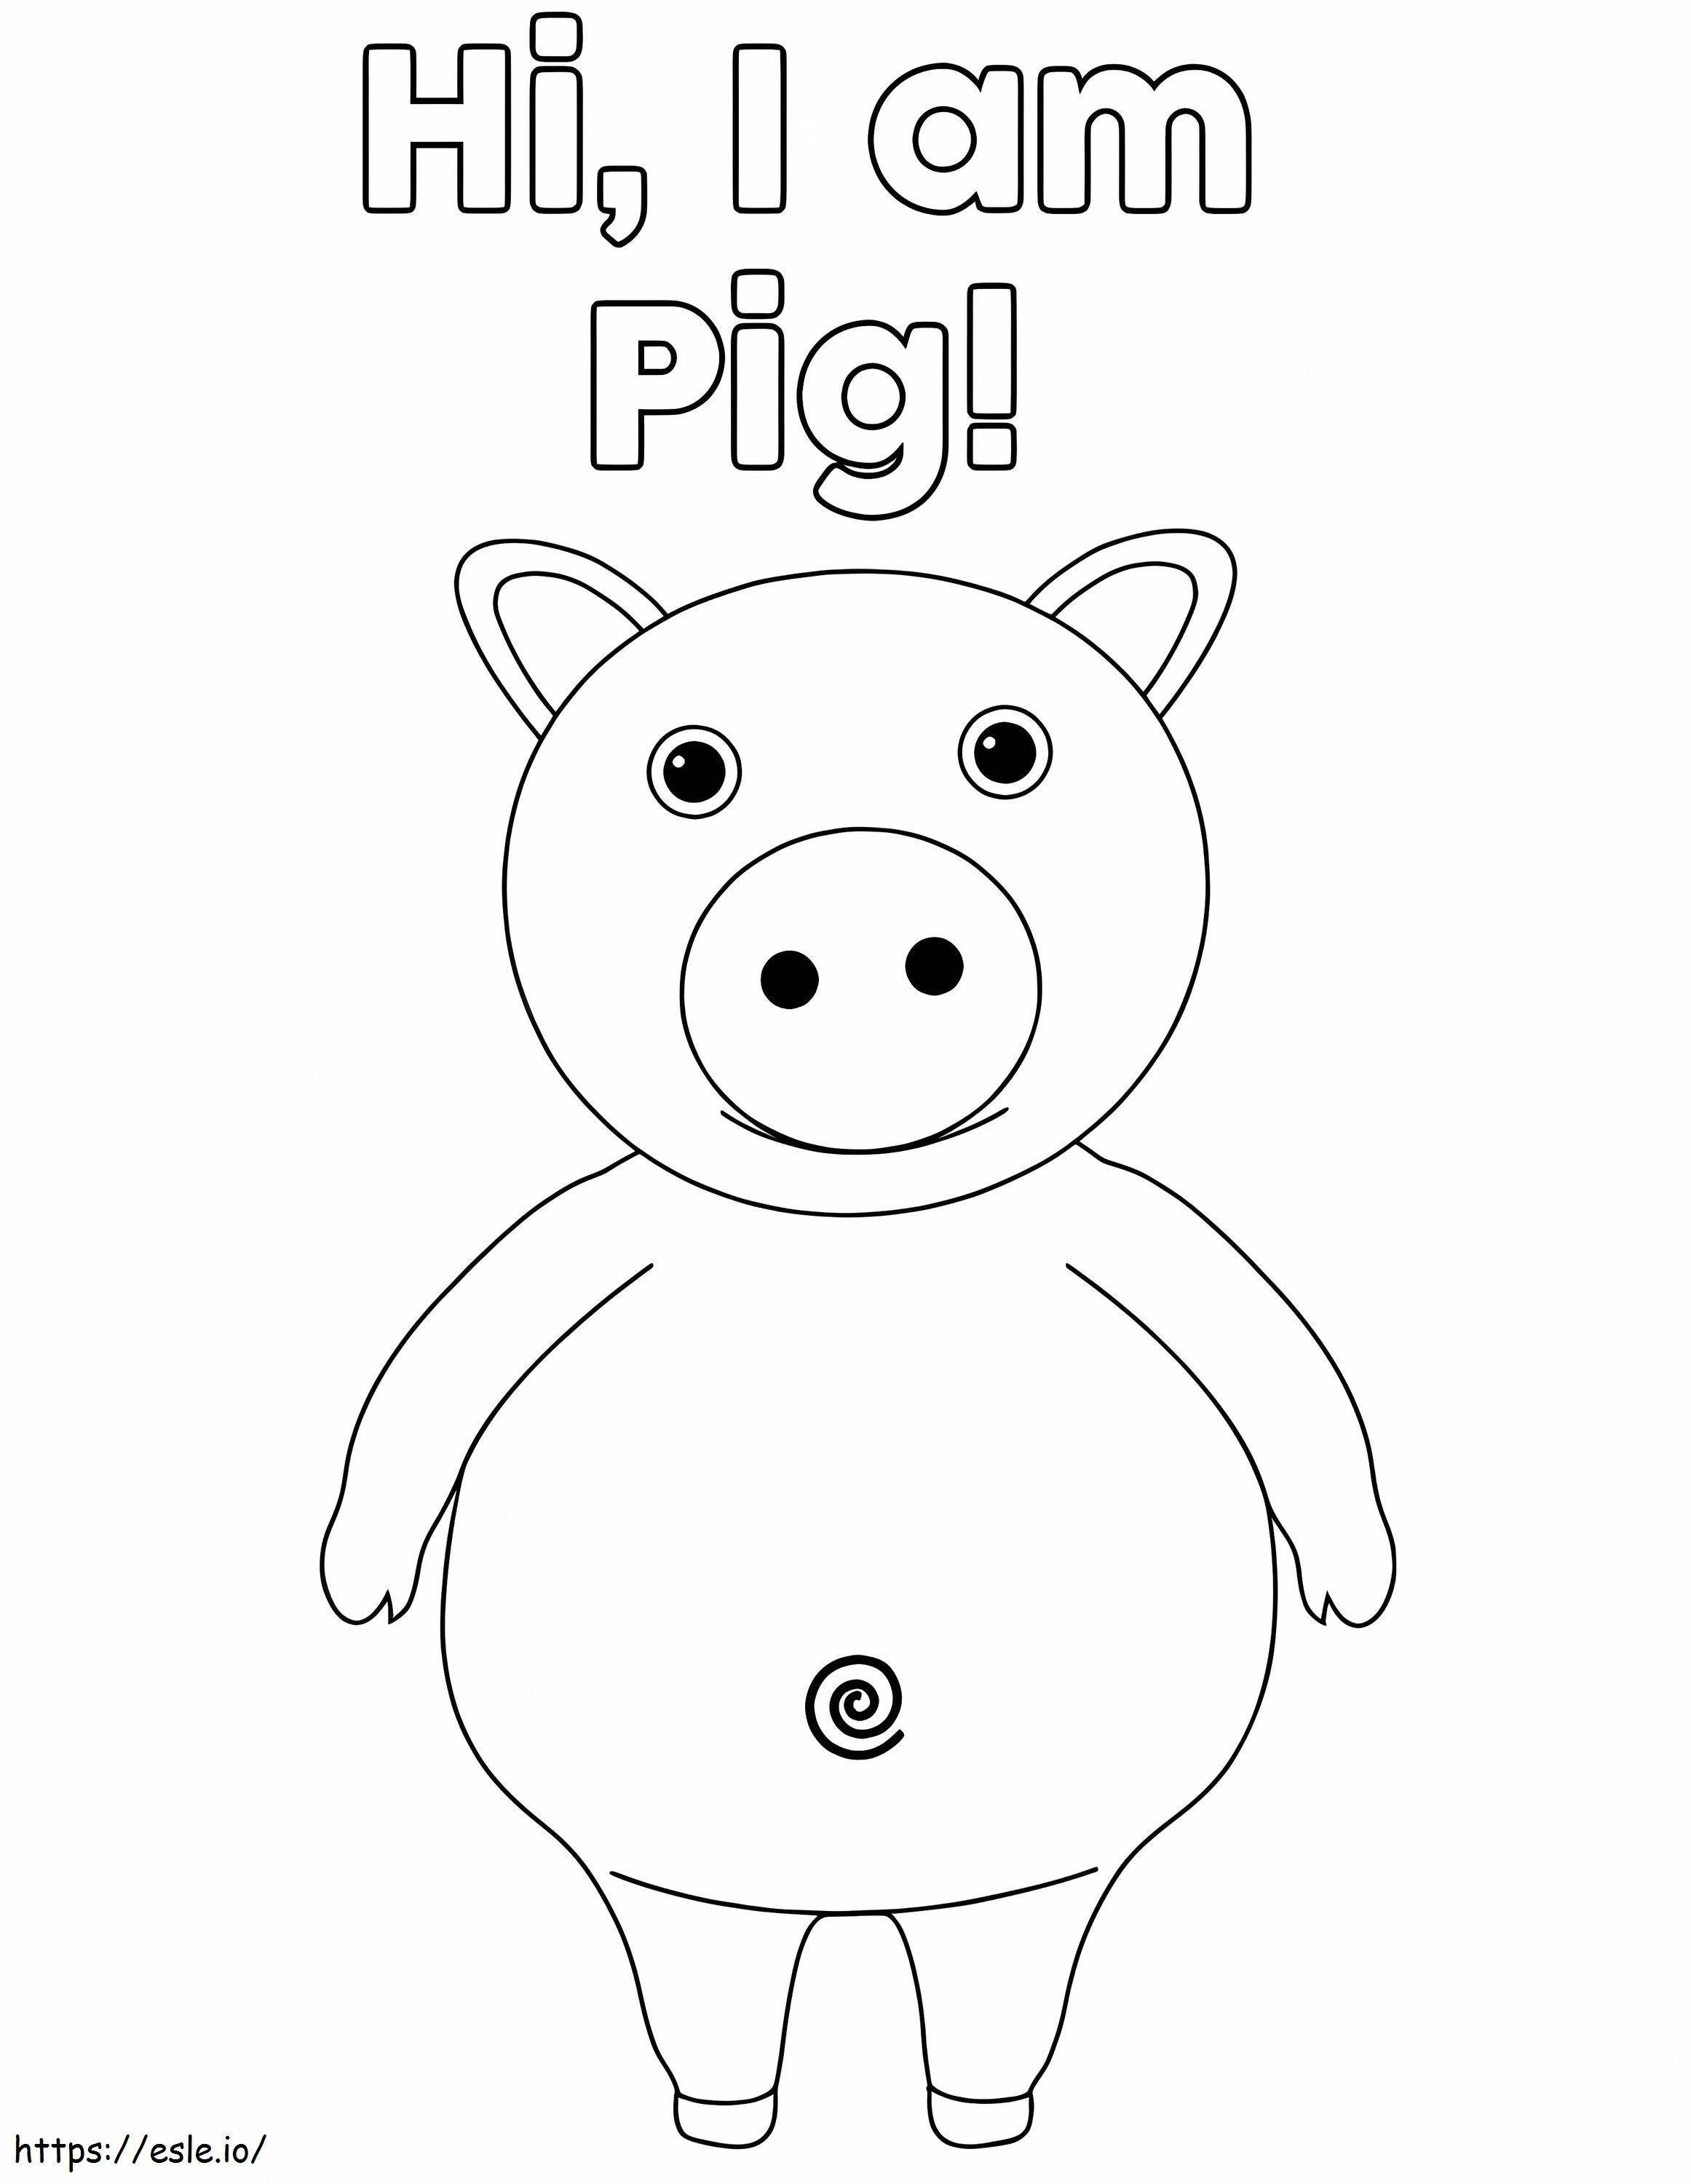 Pig Little Baby Bum coloring page